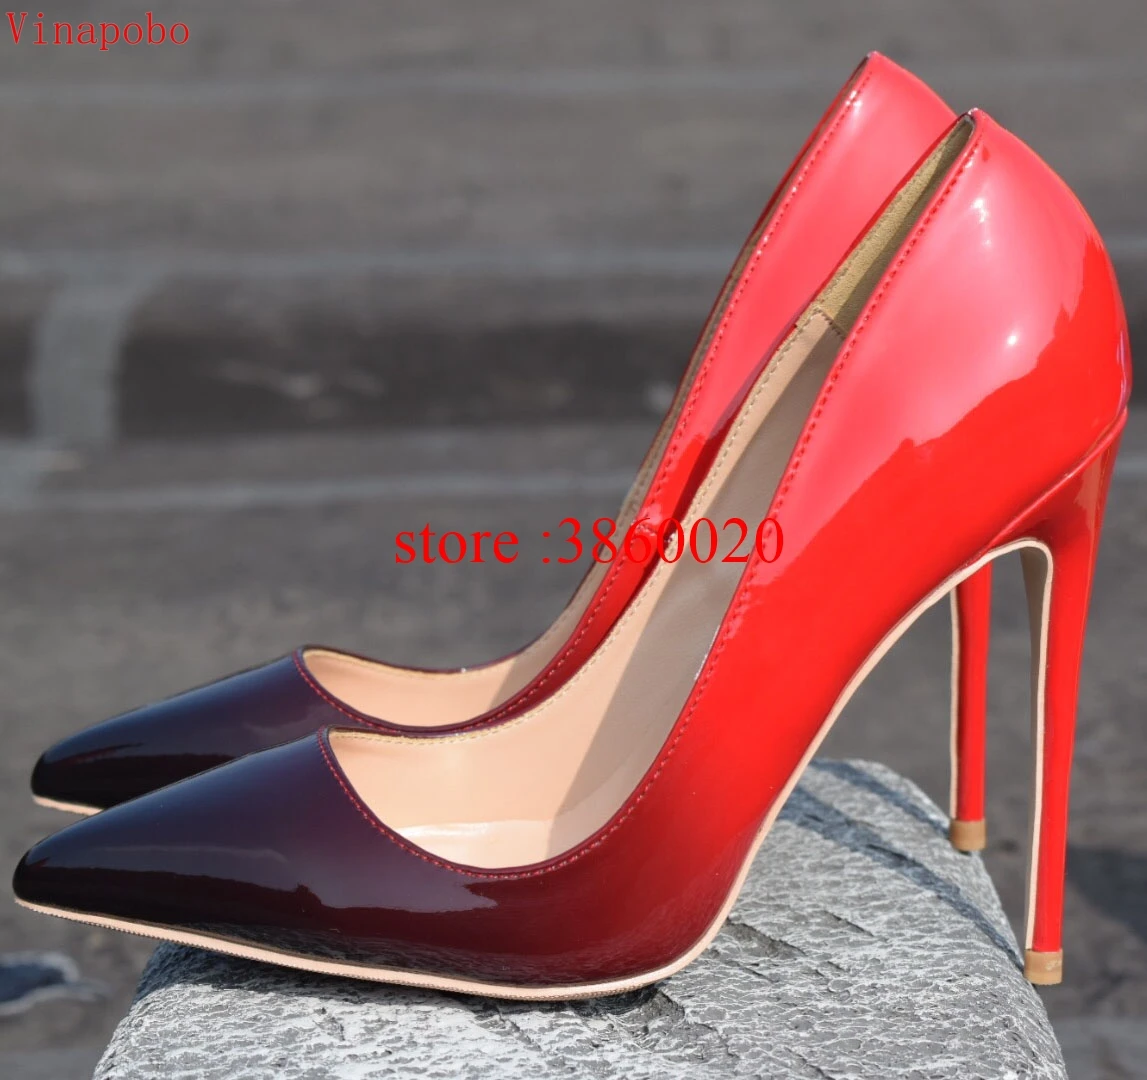 Low price Hot Selling Women Shoes Pointed Toe Pumps Patent Leather Dress 8CM High Heels Shoes Shadow Wedding Shoes Zapatos Mujer images - 6